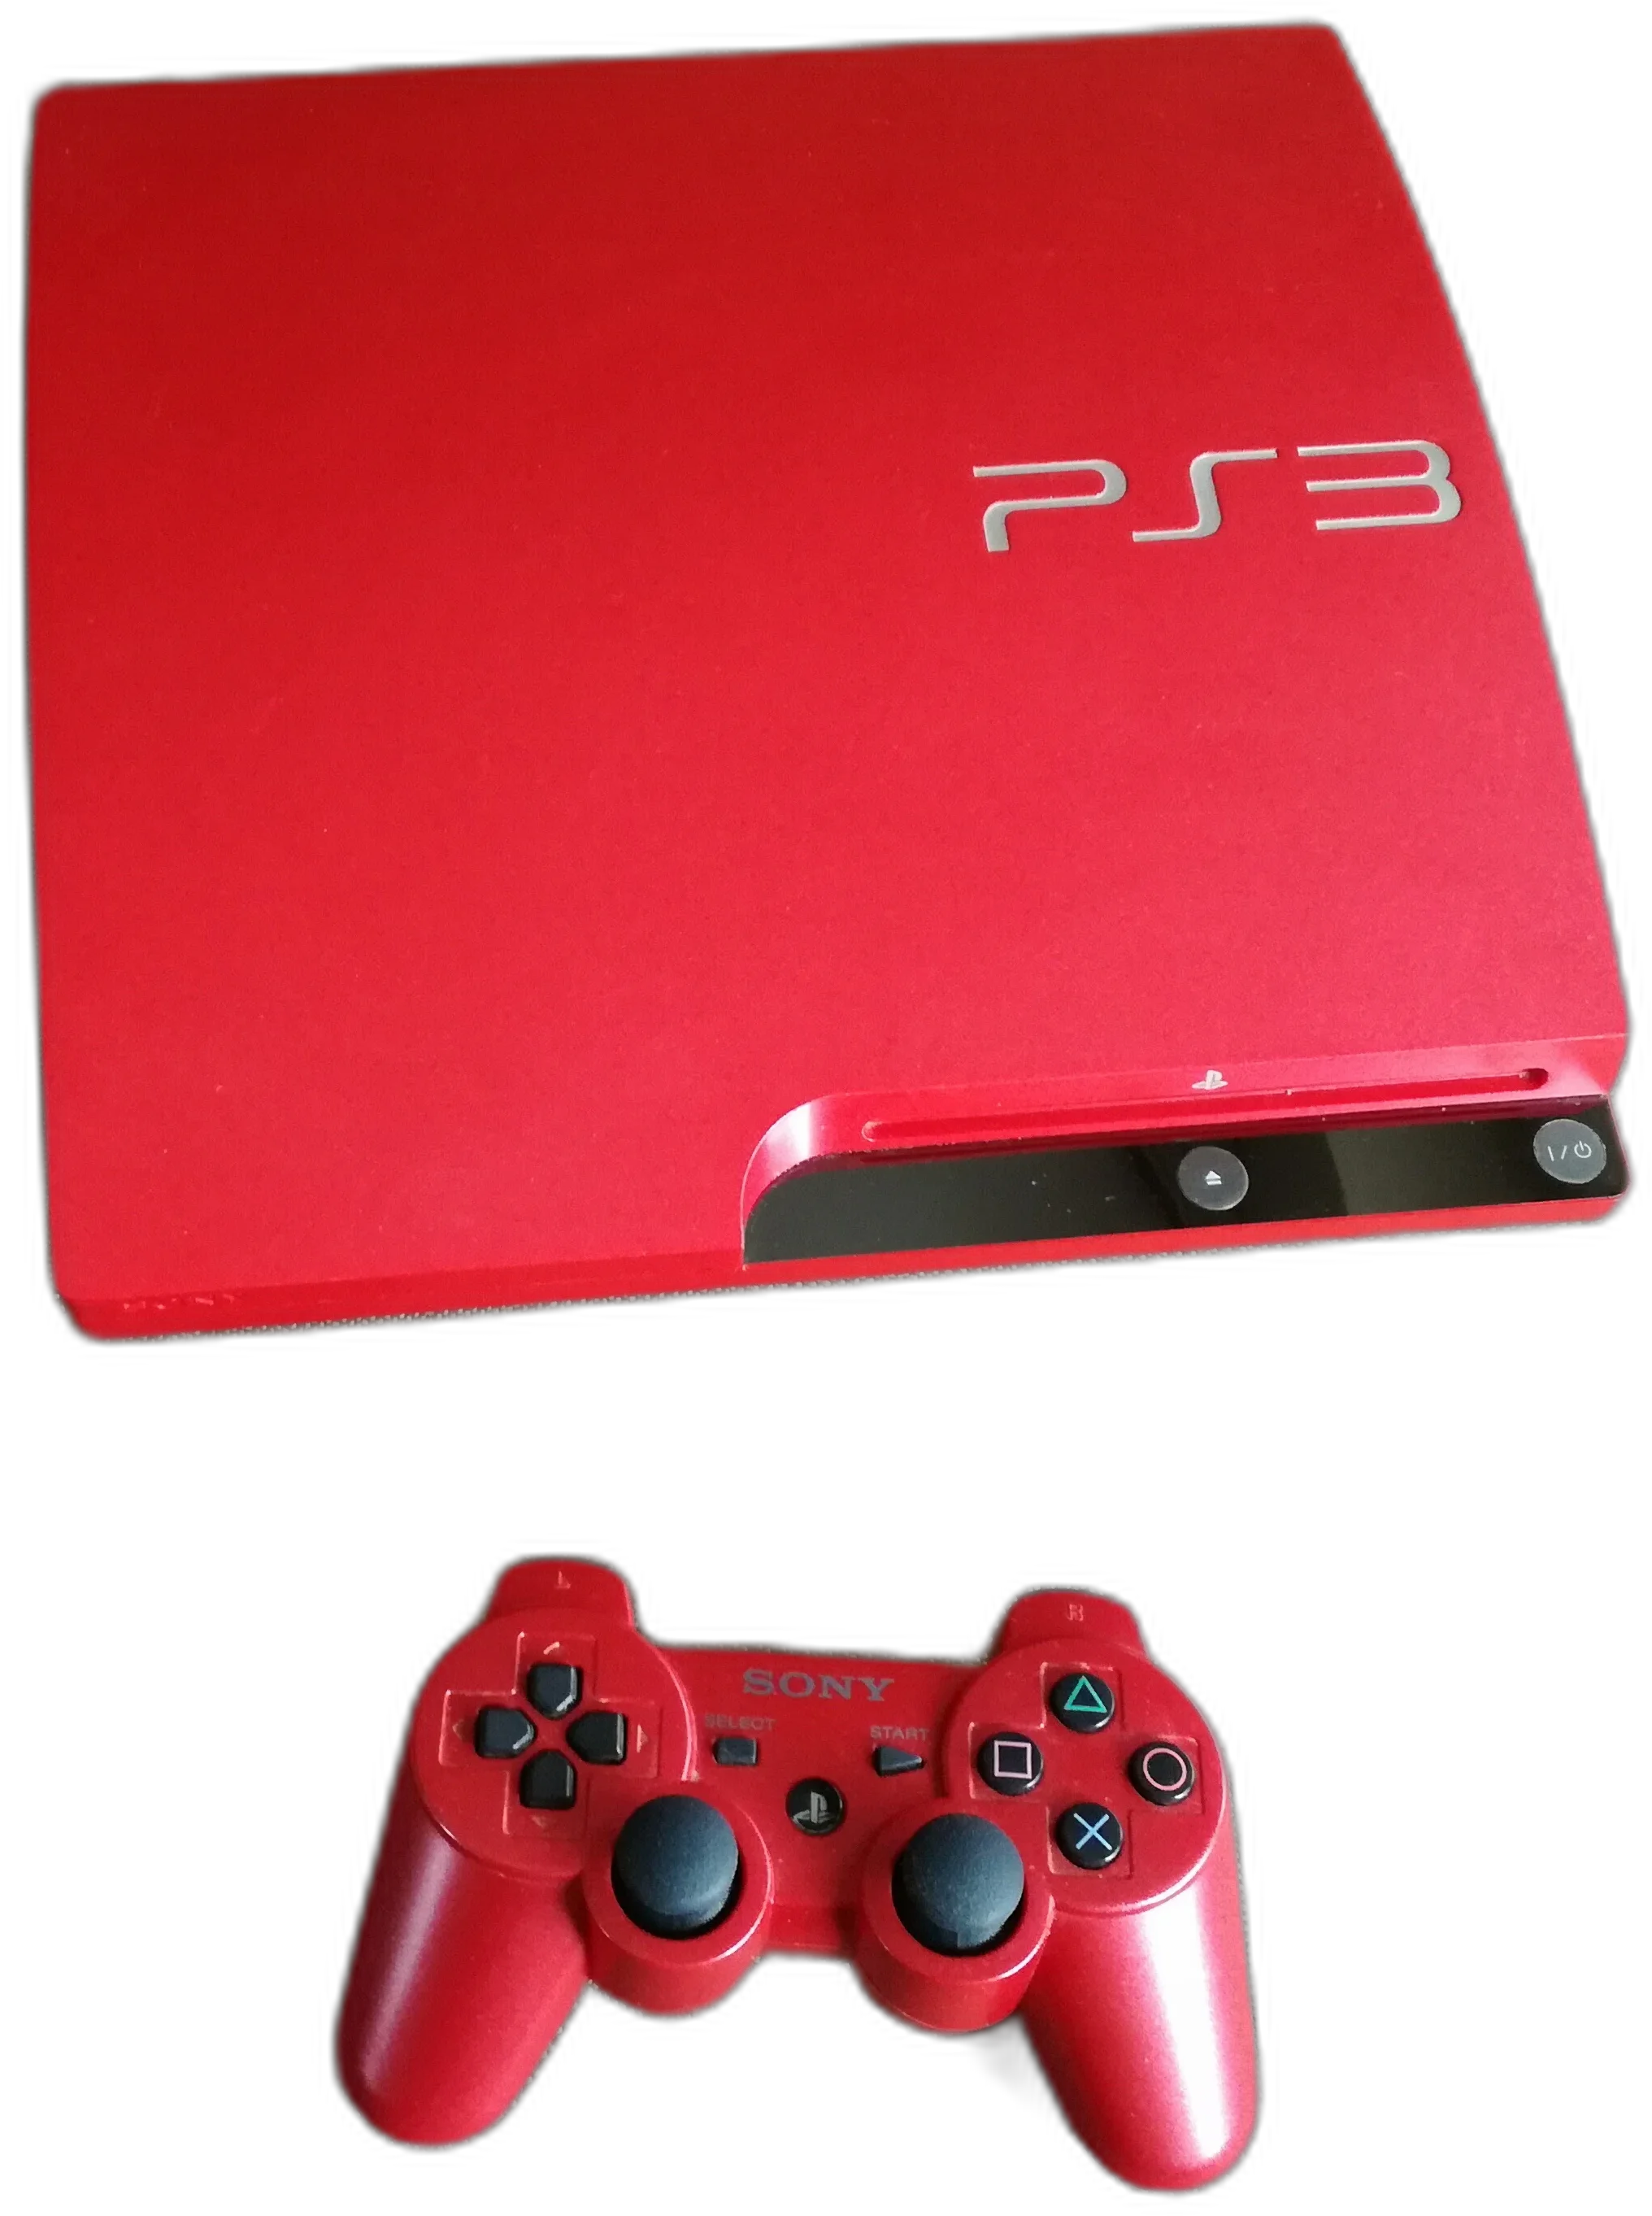 Sony PlayStation 3 Slim Red Console [JP]